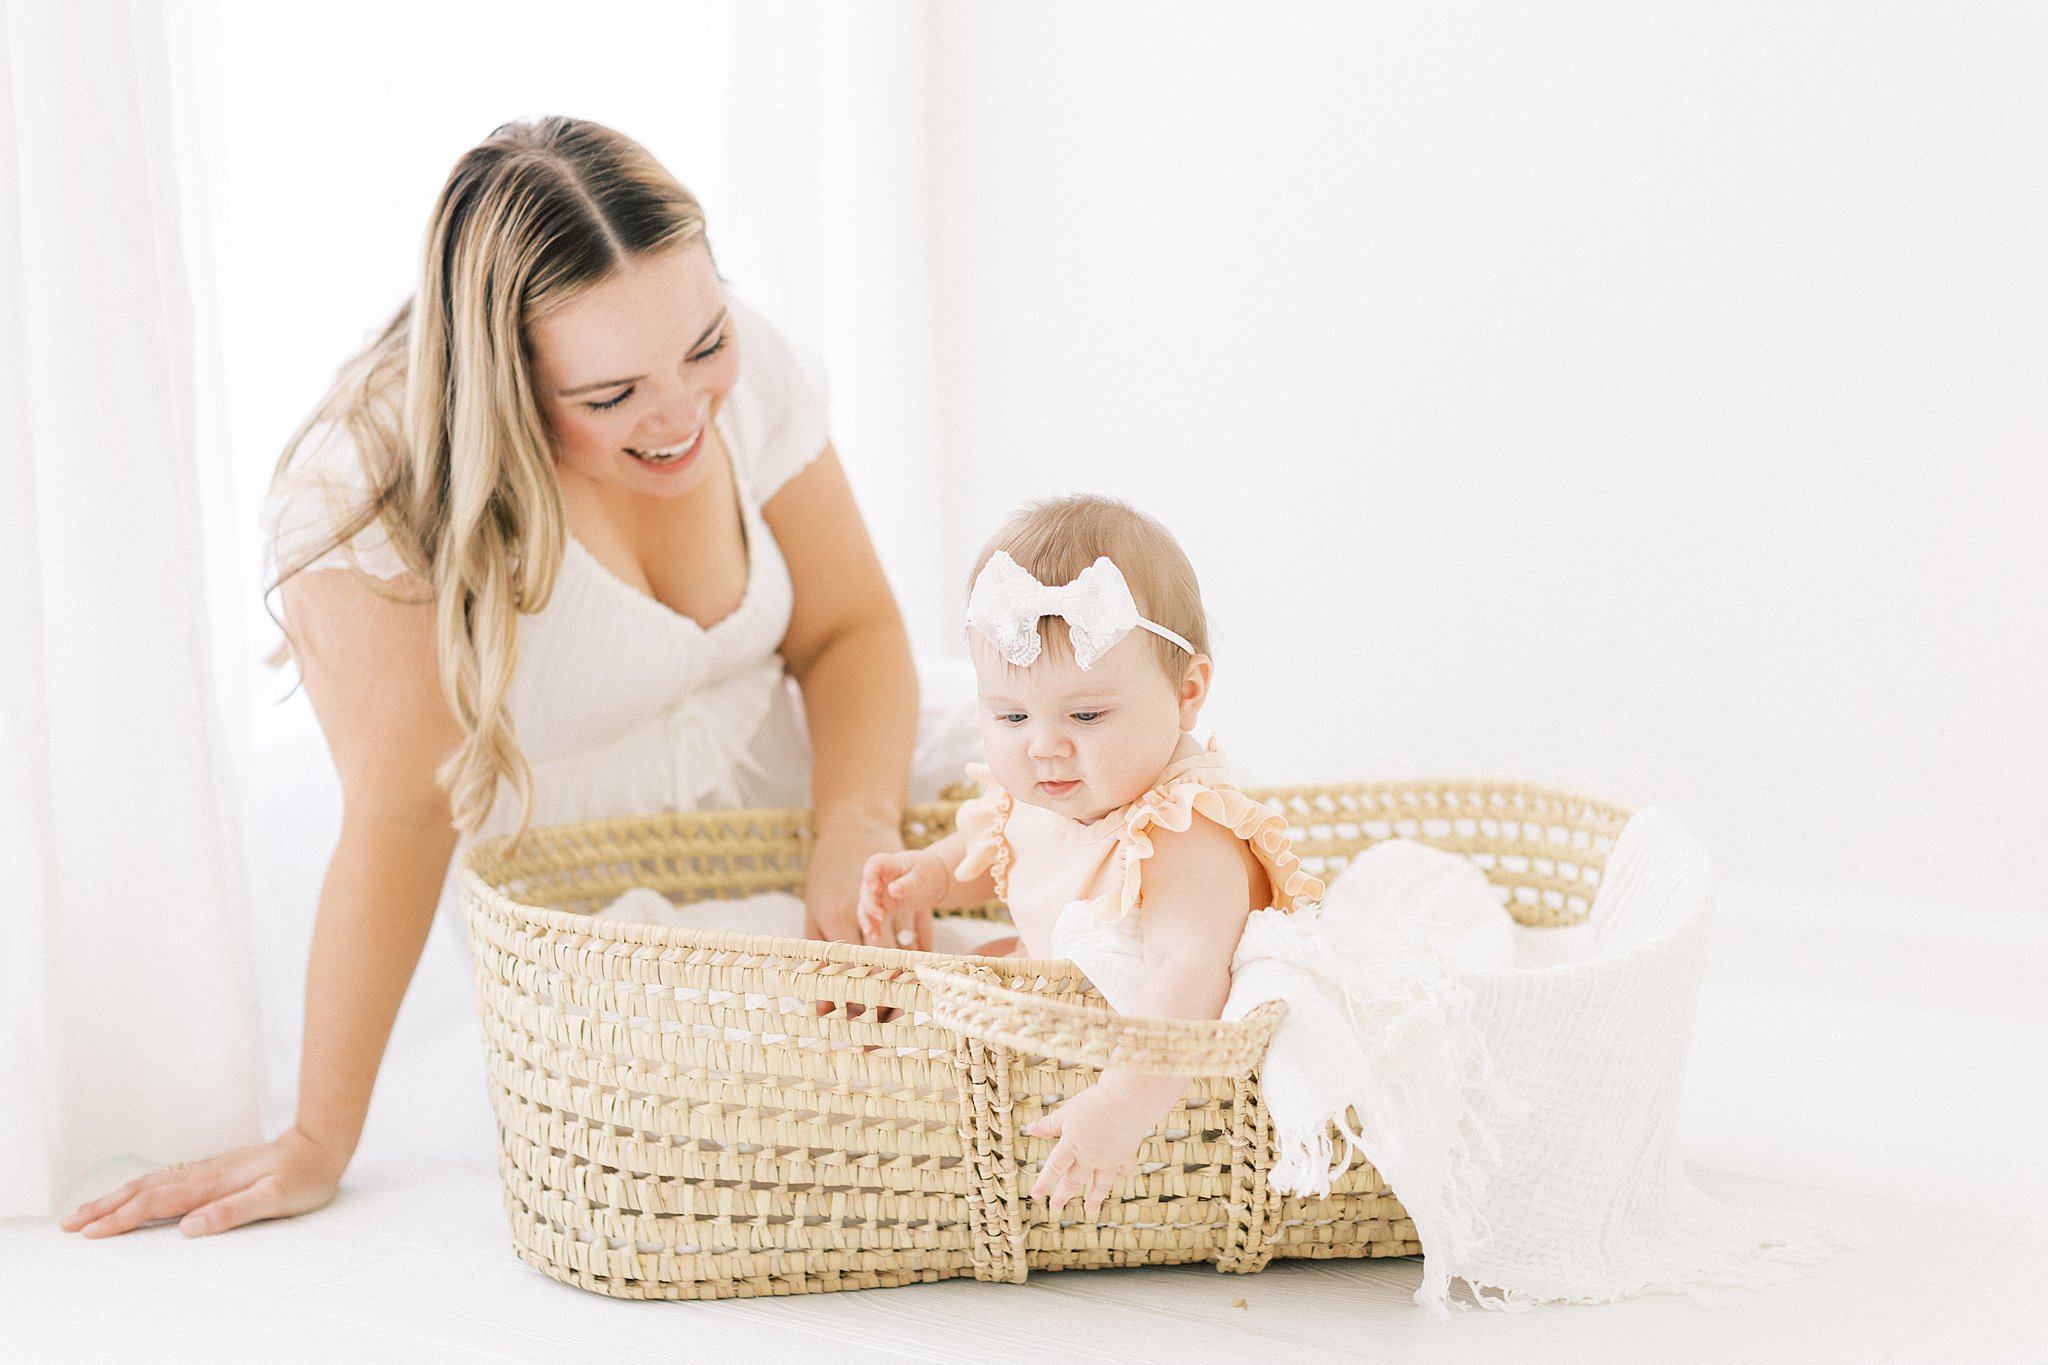 An infant baby girl sits and plays in a woven basket with a lace bow on her head while mom sits behind her Dondolo Dallas